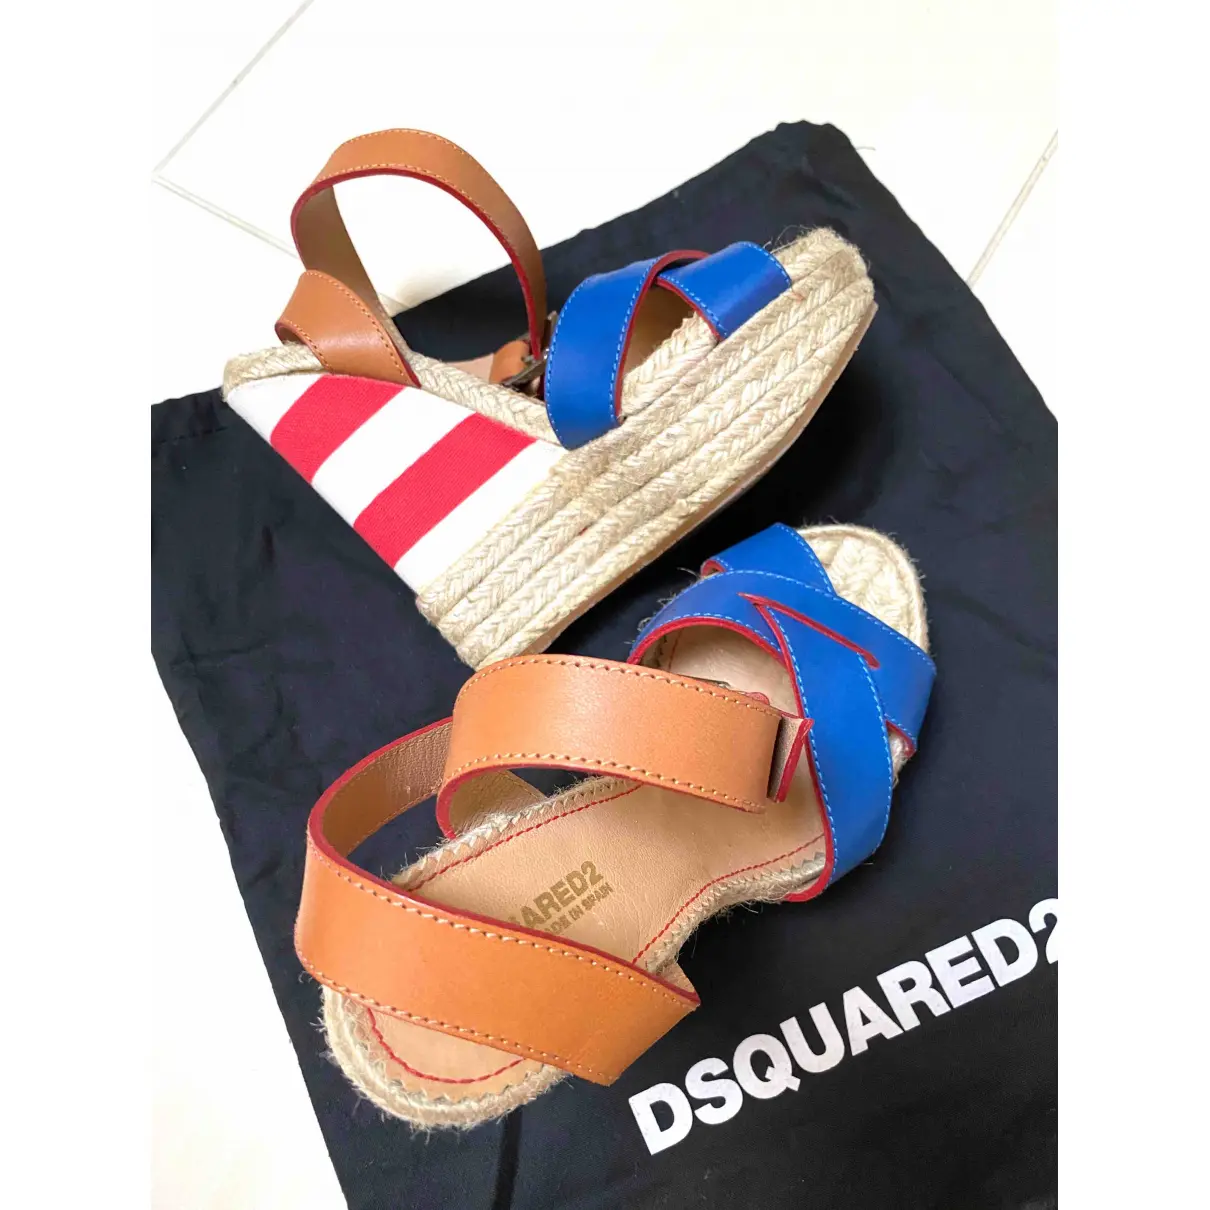 Buy Dsquared2 Leather sandal online